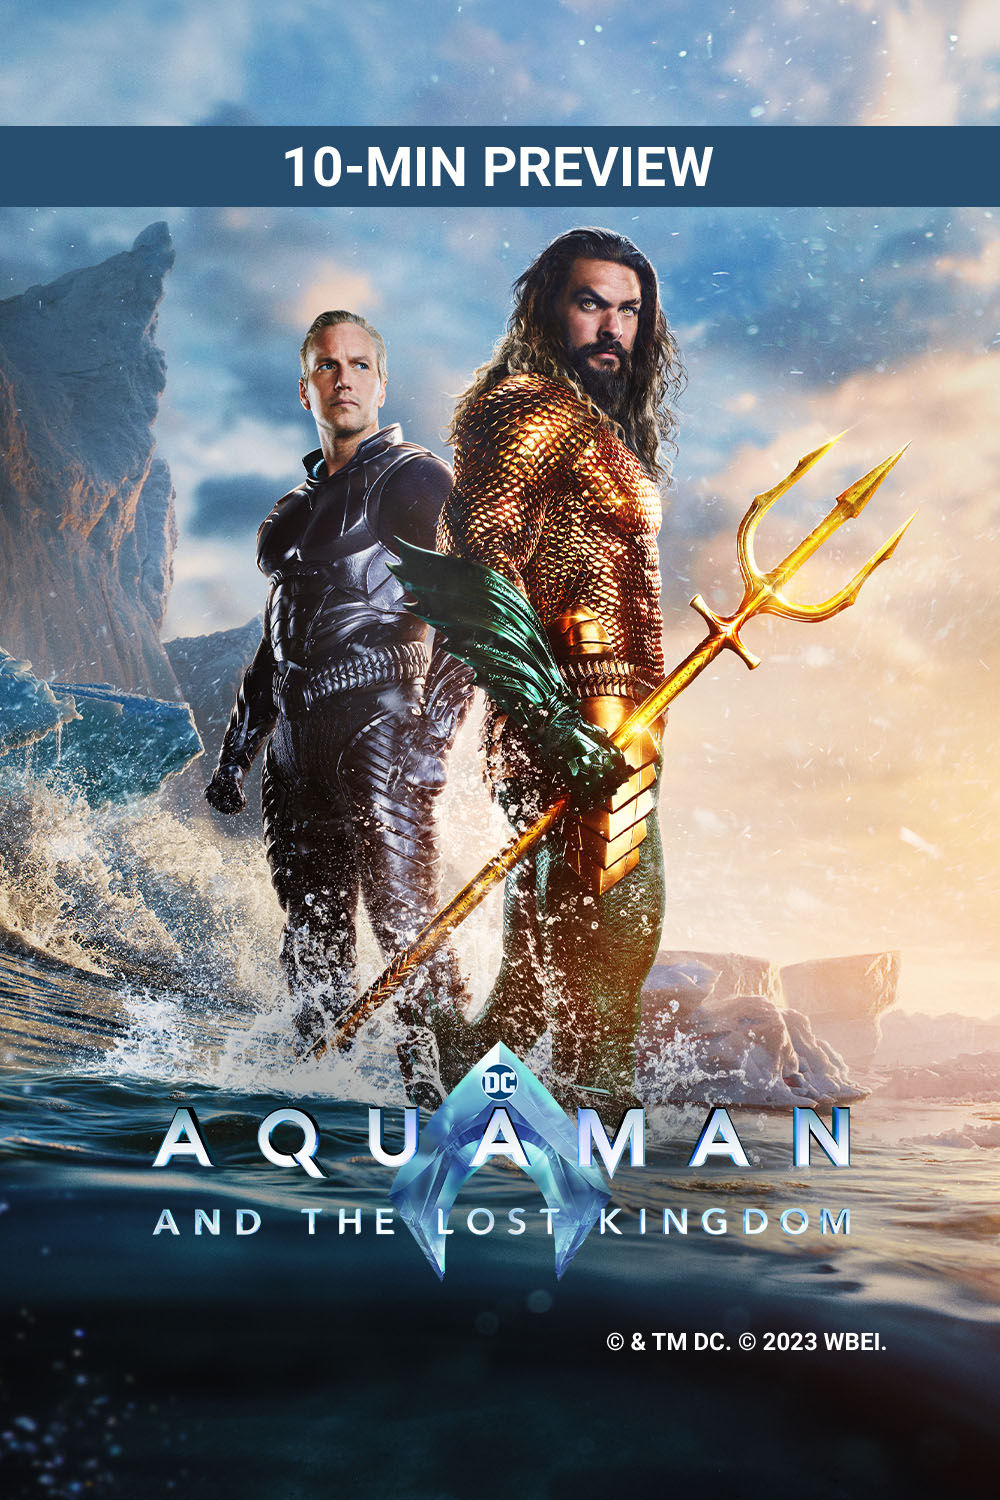 Watch Aquaman and the Lost Kingdom (10-Minute Preview) Online